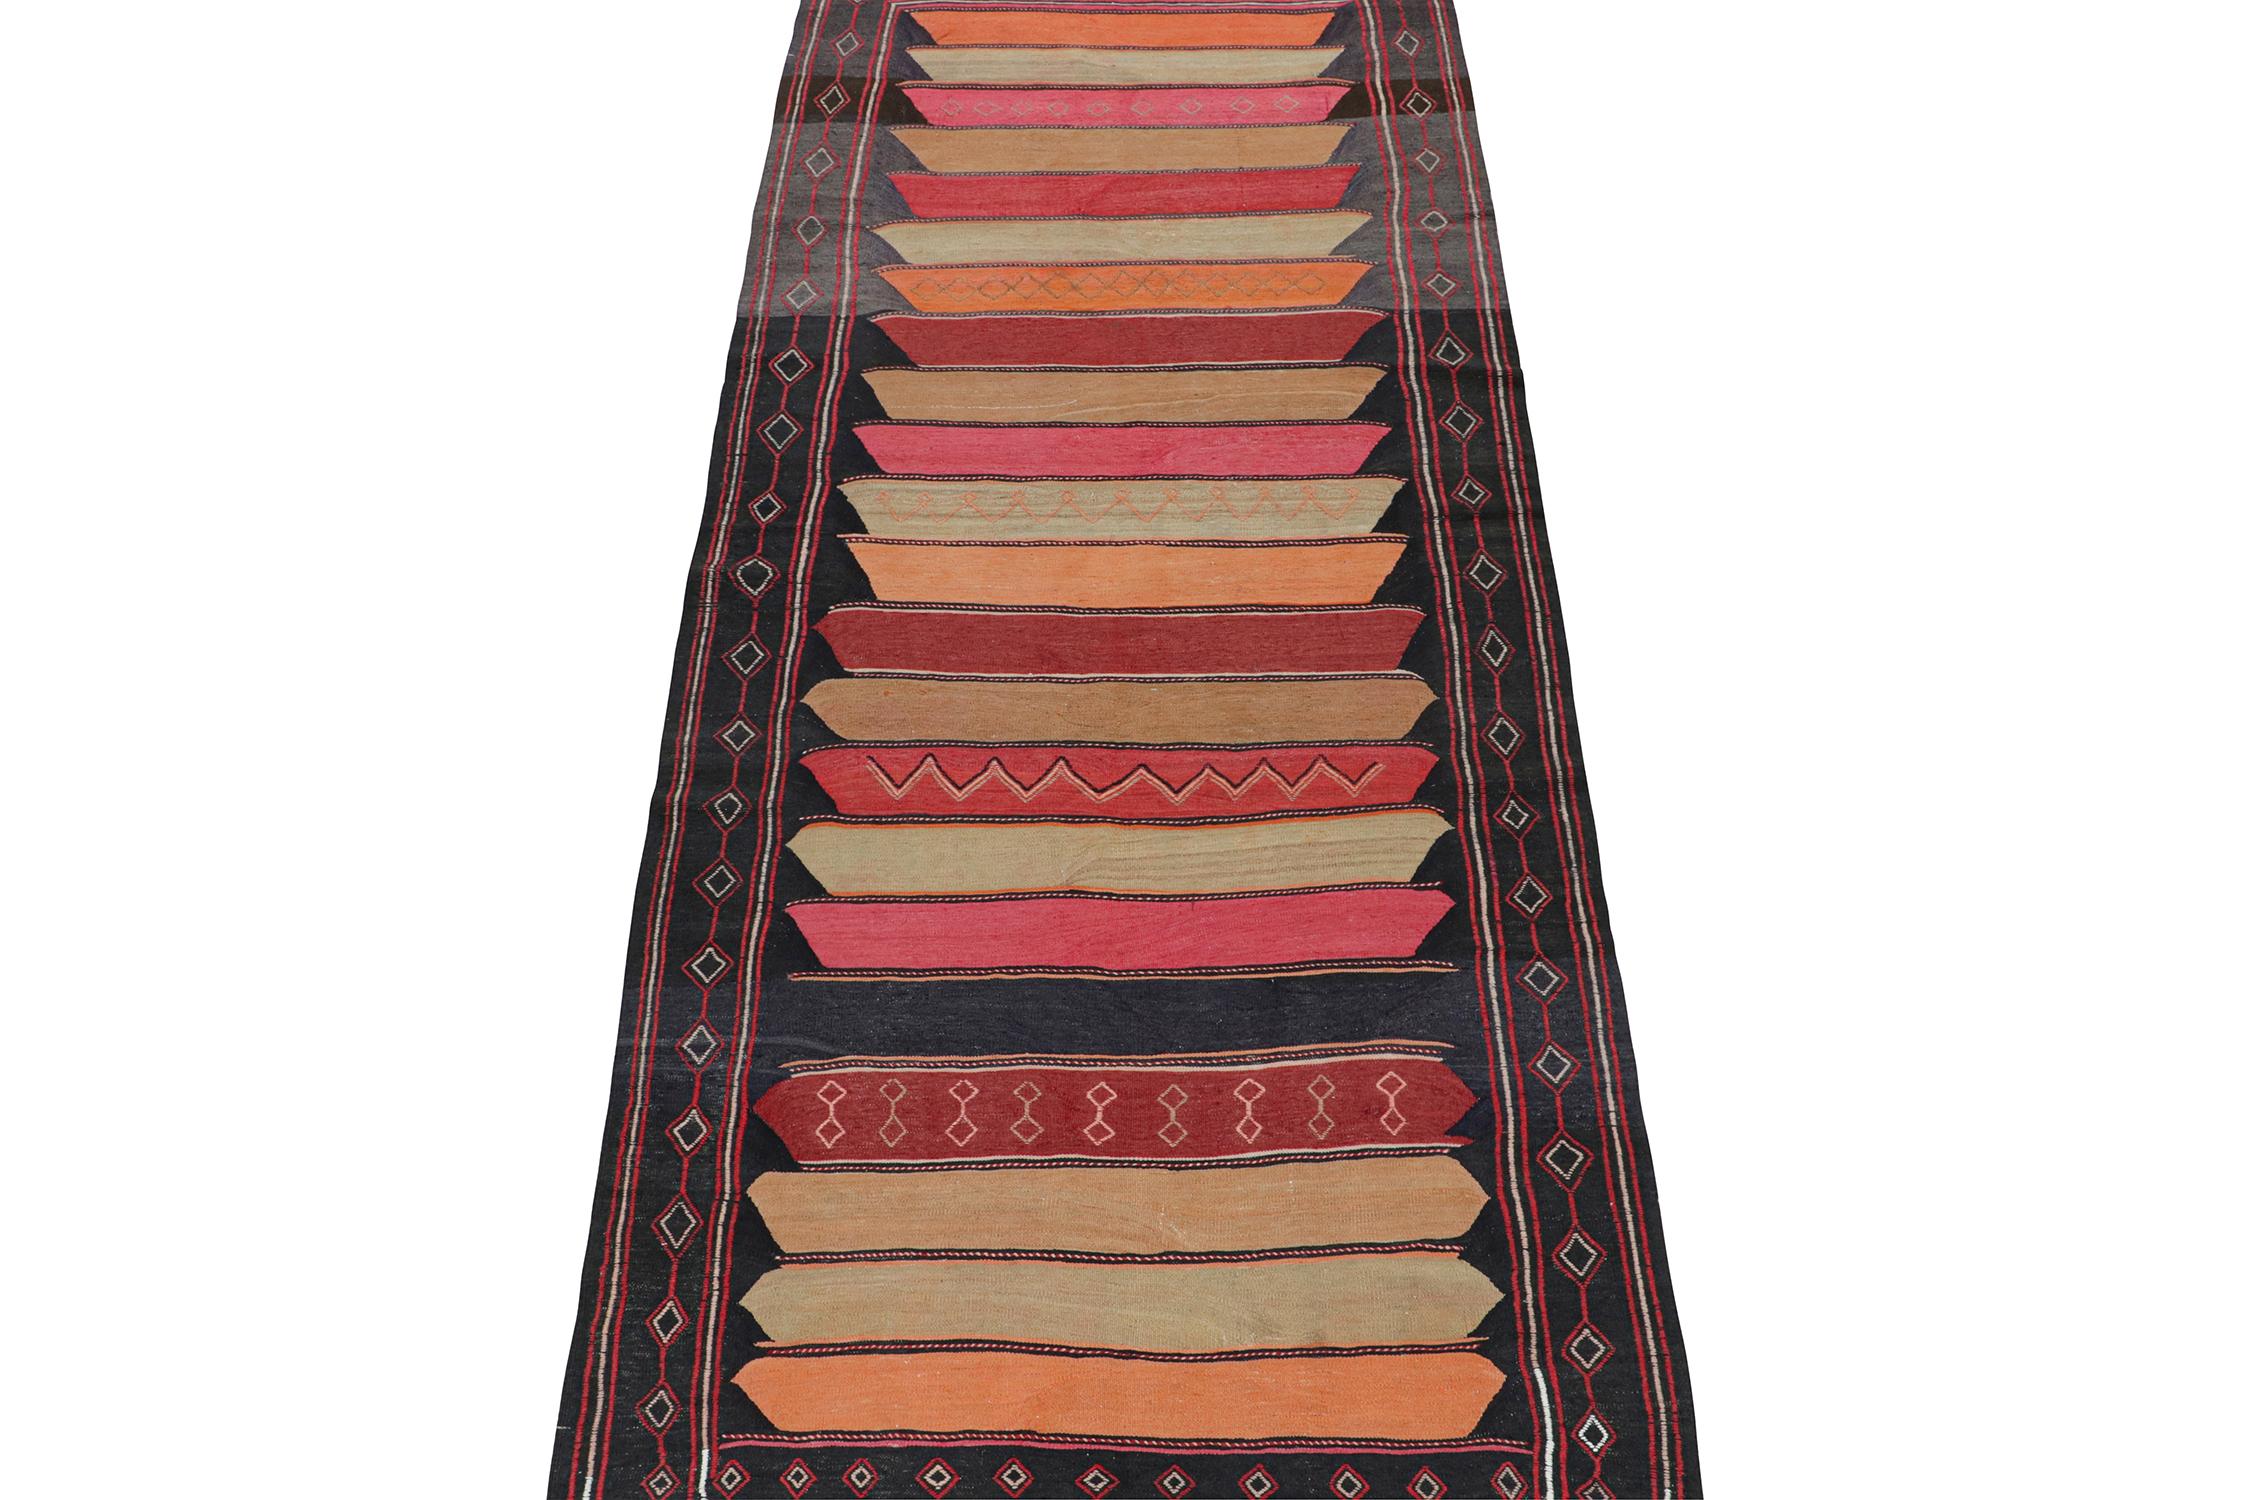 This vintage 5x13 Persian Kilim is handwoven in wool, and originates circa 1950-1960. Connoisseurs may also note that Rug & Kilim believes this to be a Northwest design, and appreciate the culture therein as much as its beauty.

Further on the